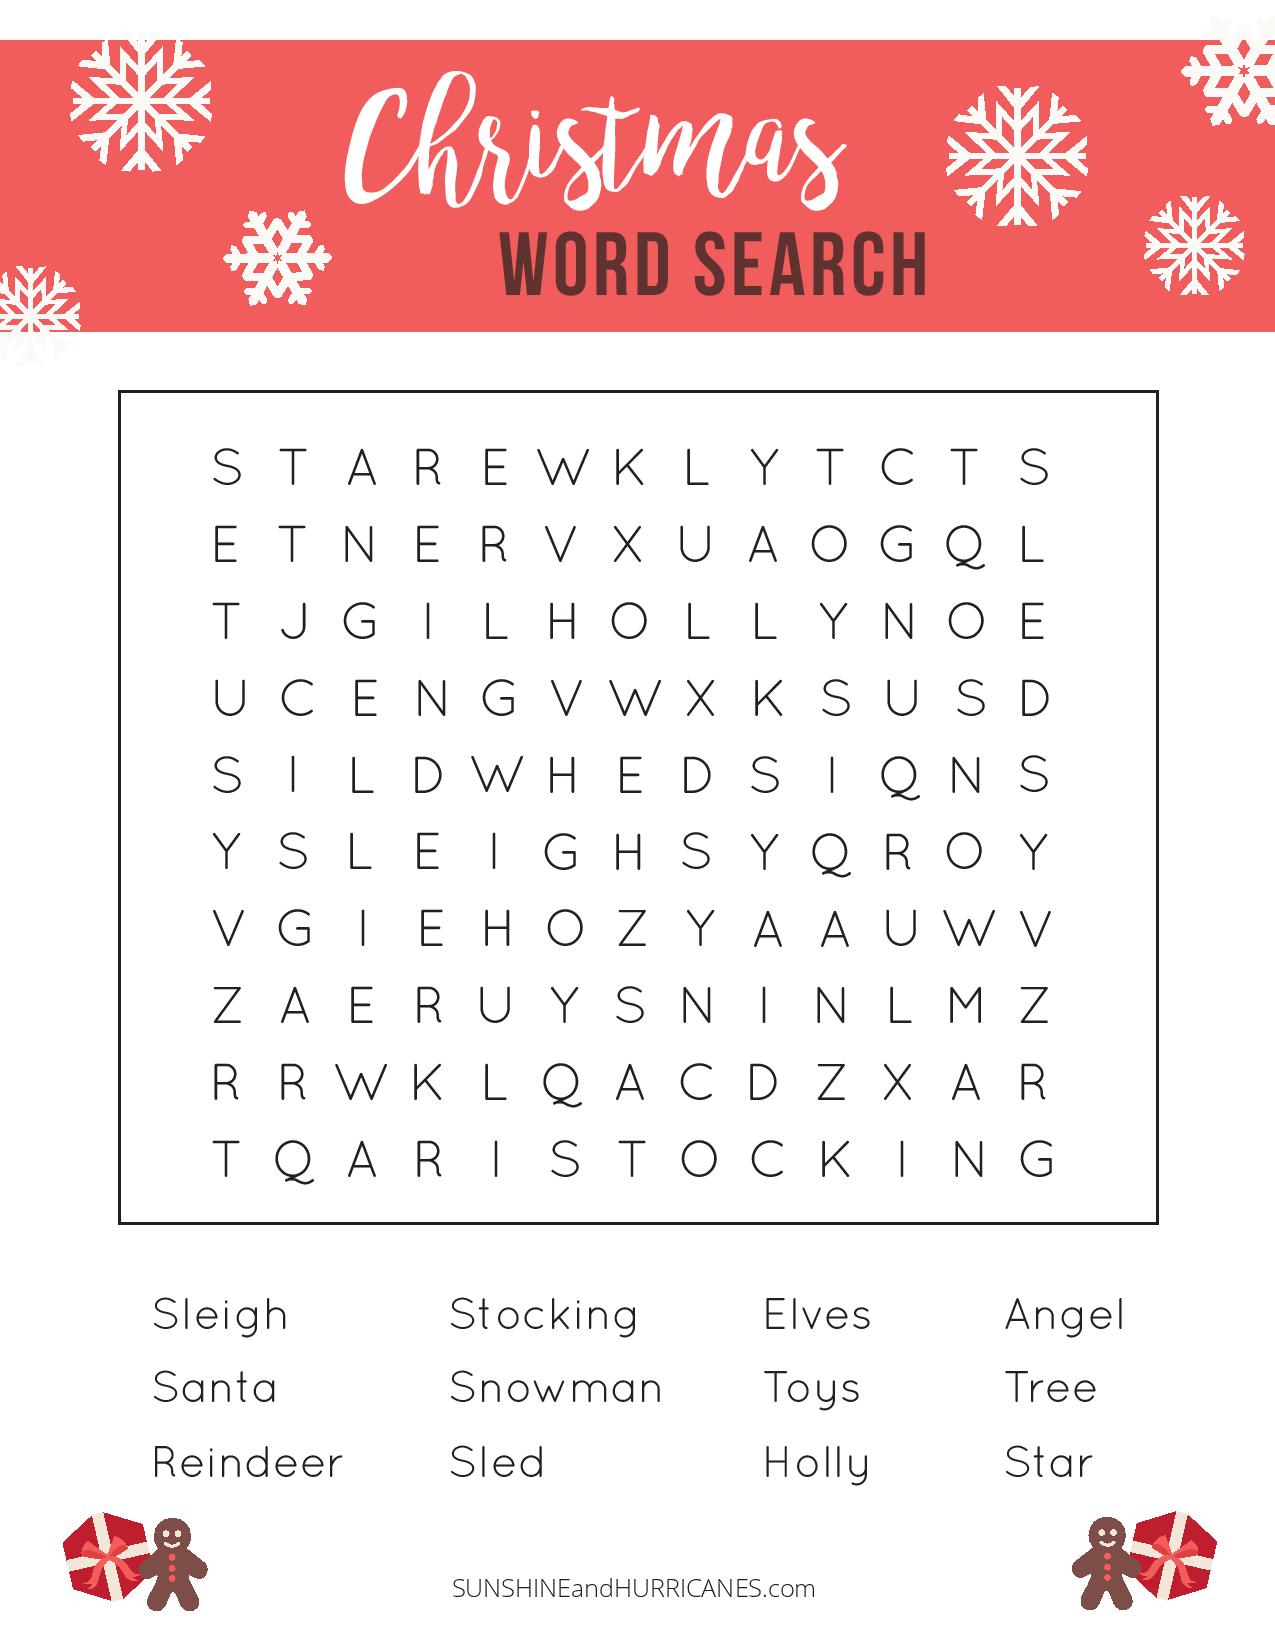 https://www.sunshineandhurricanes.com/wp-content/uploads/2017/10/Christmas-Word-Search-Image.jpg